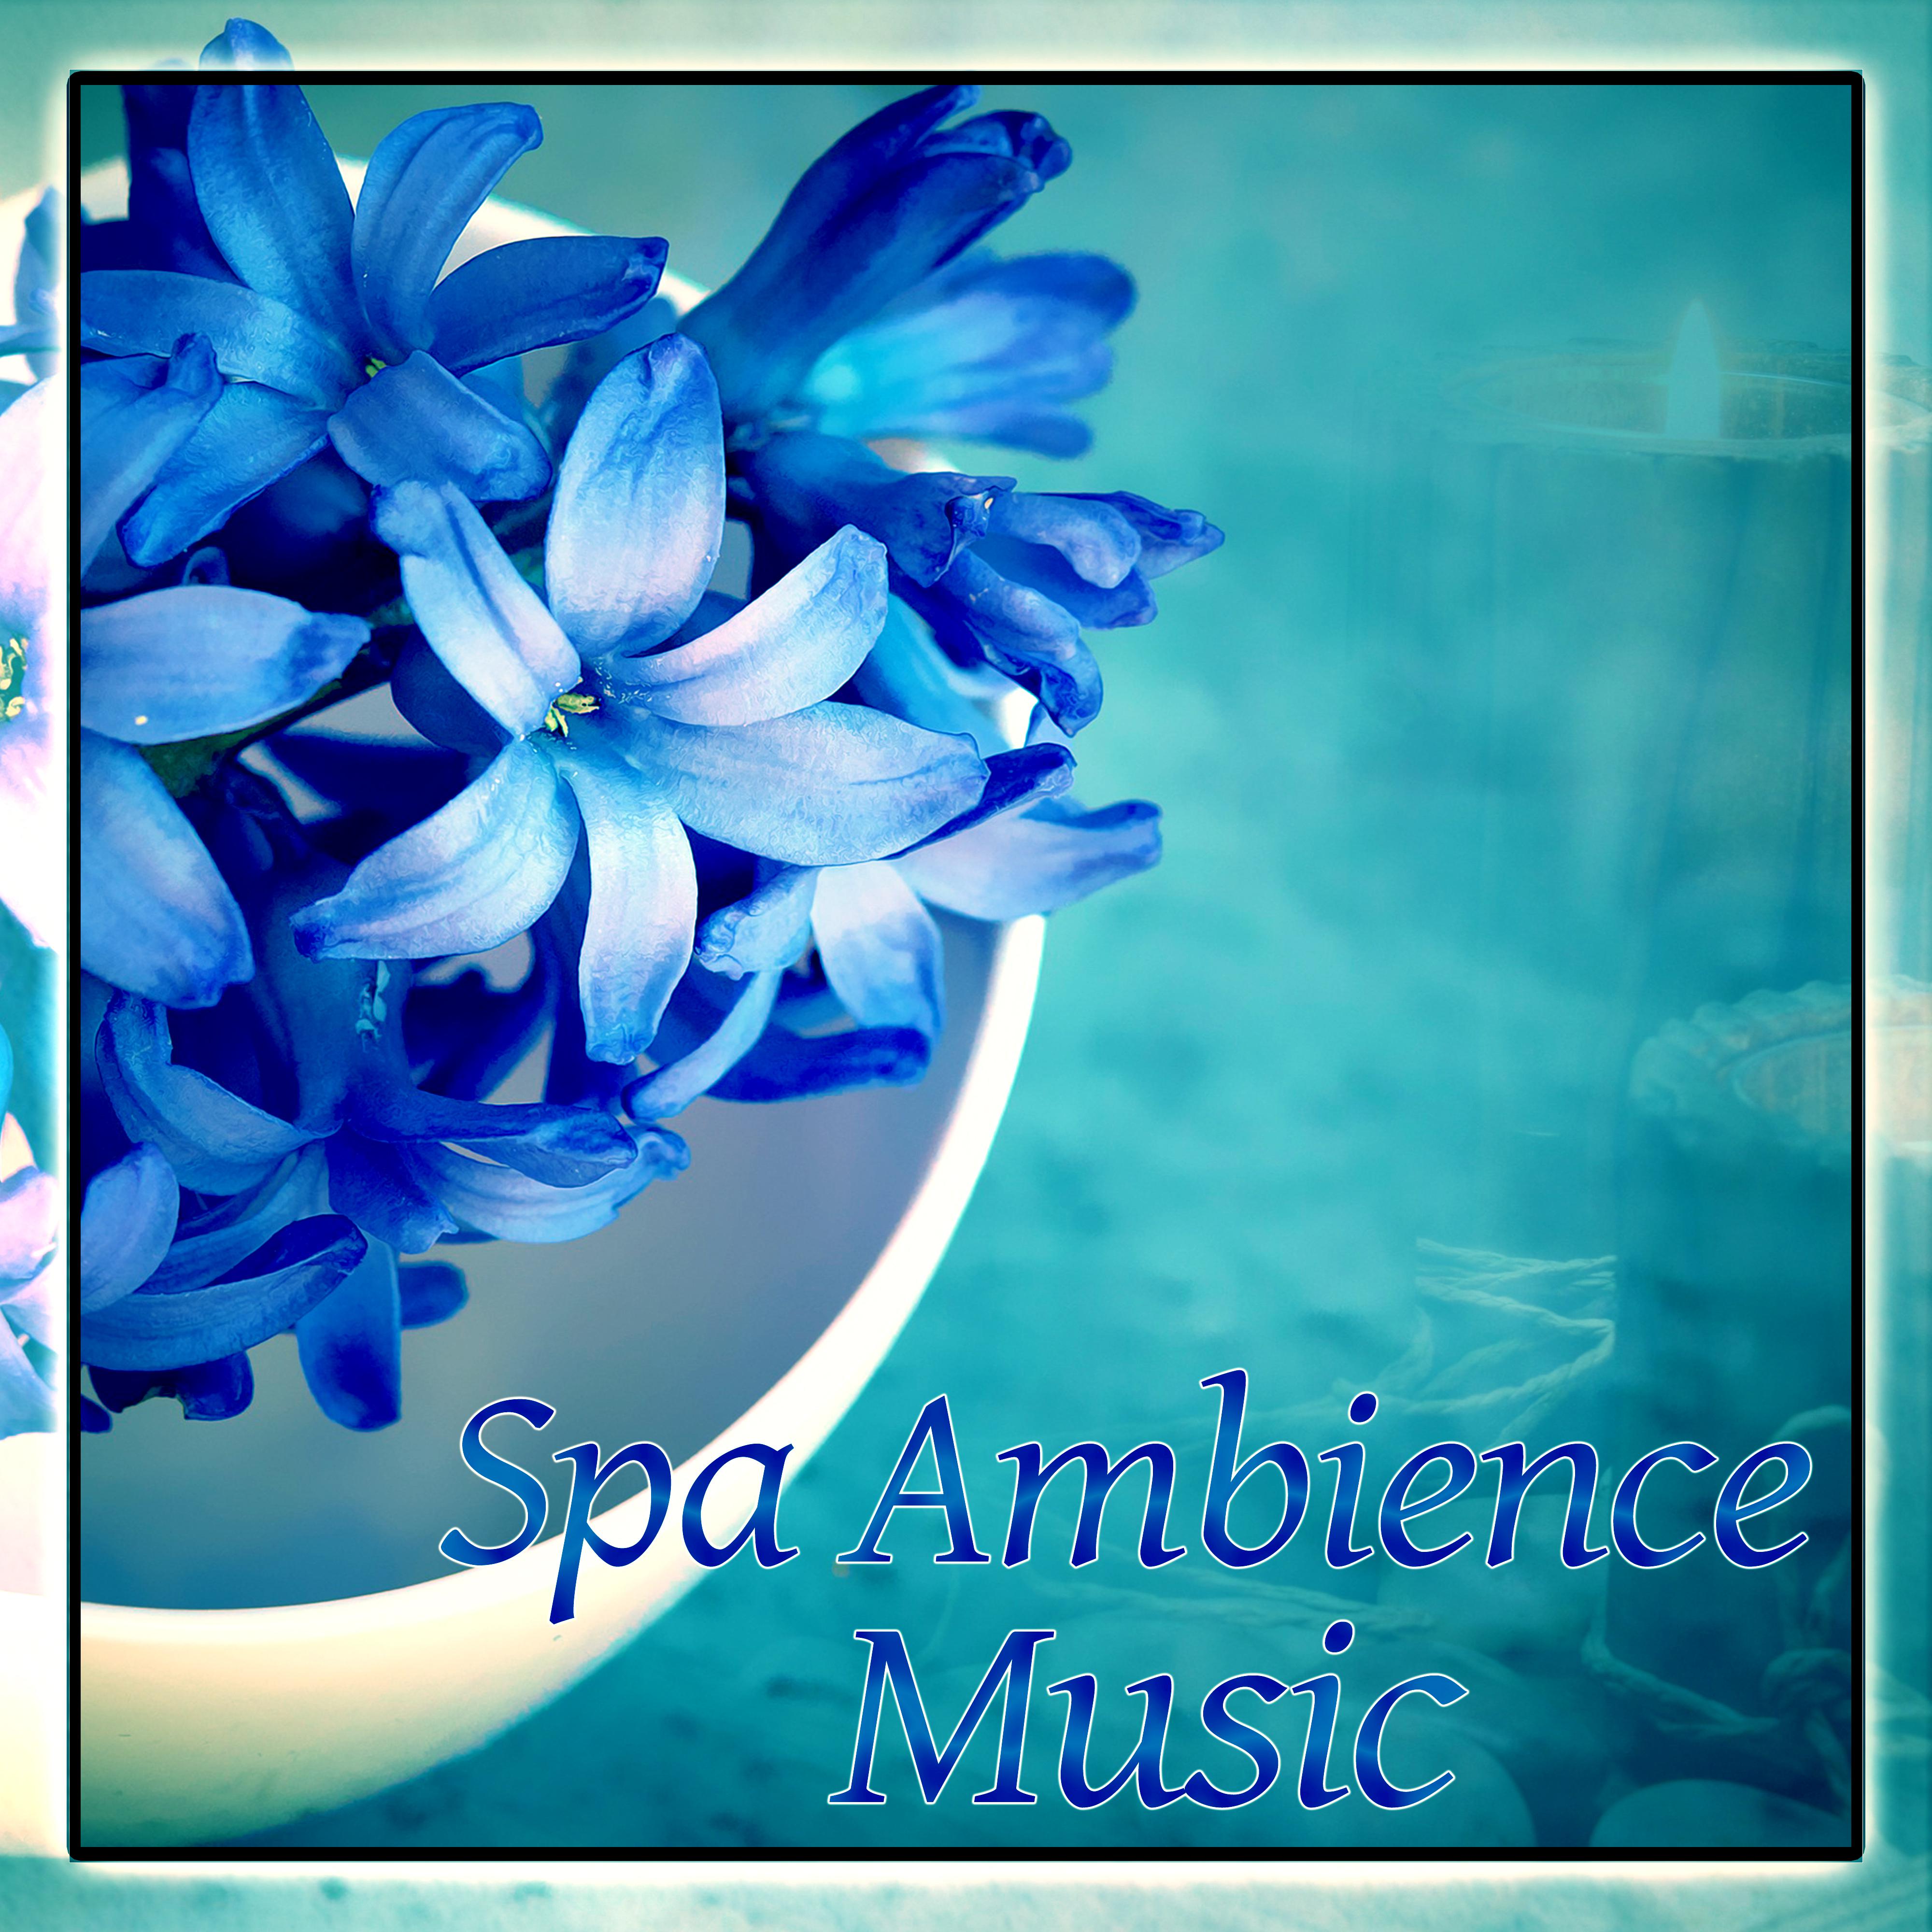 Spa Ambience Music – New Age Music for Feel Calmness, Peaceful while Spa Treatments, Soothing Sounds for Wellness, Bliss Spa